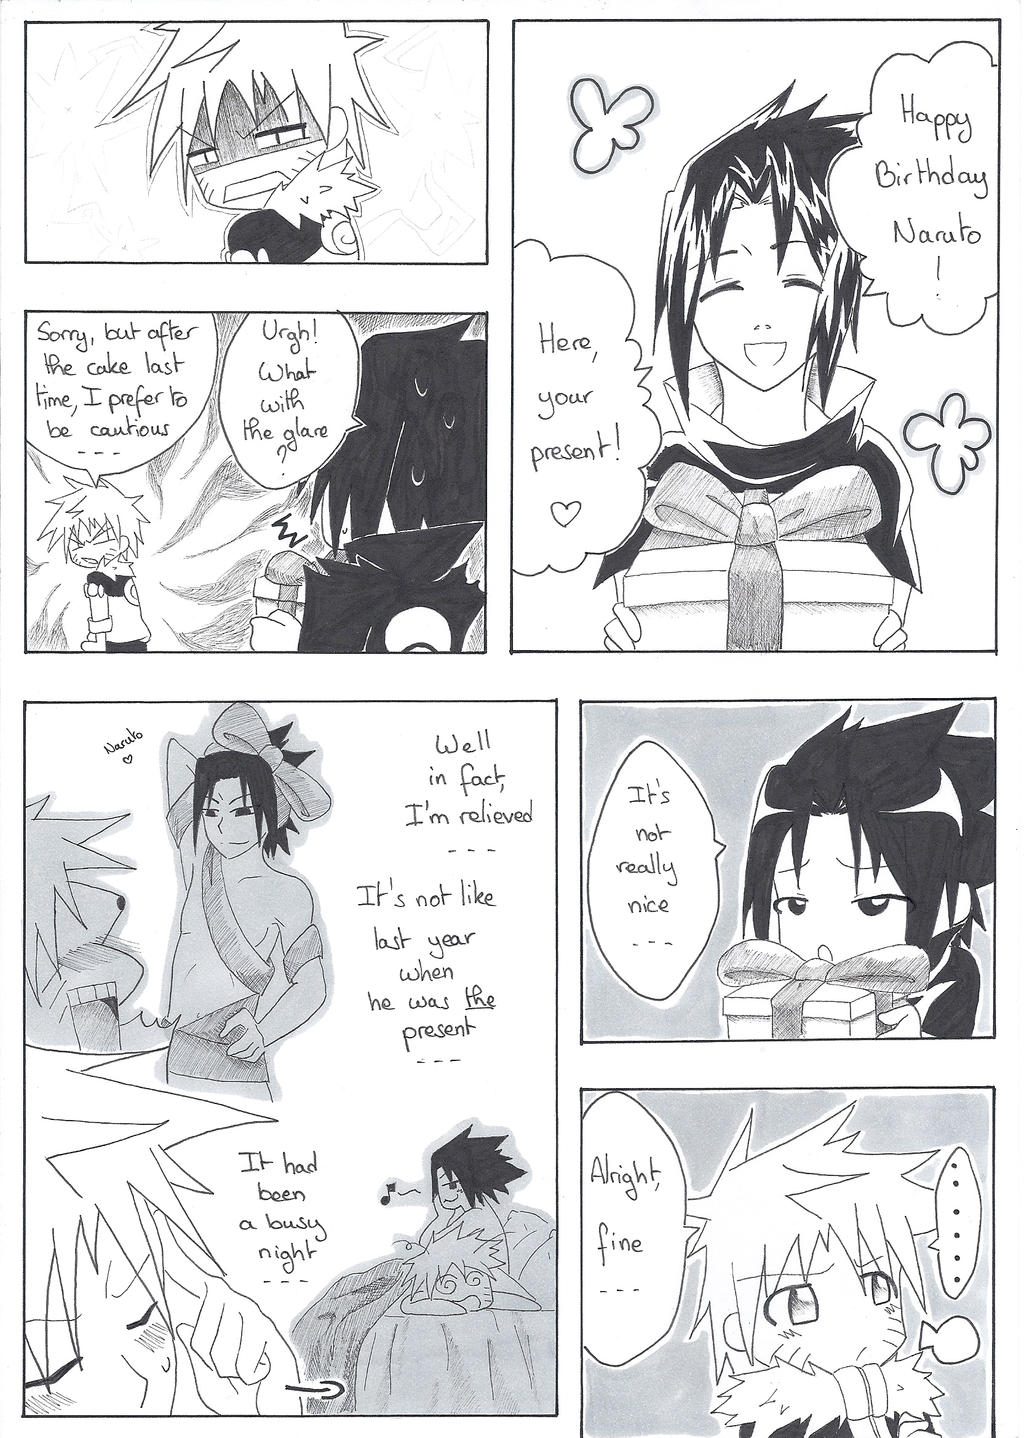 Special Naruto B-day 2012 Comic 2 Pg 1